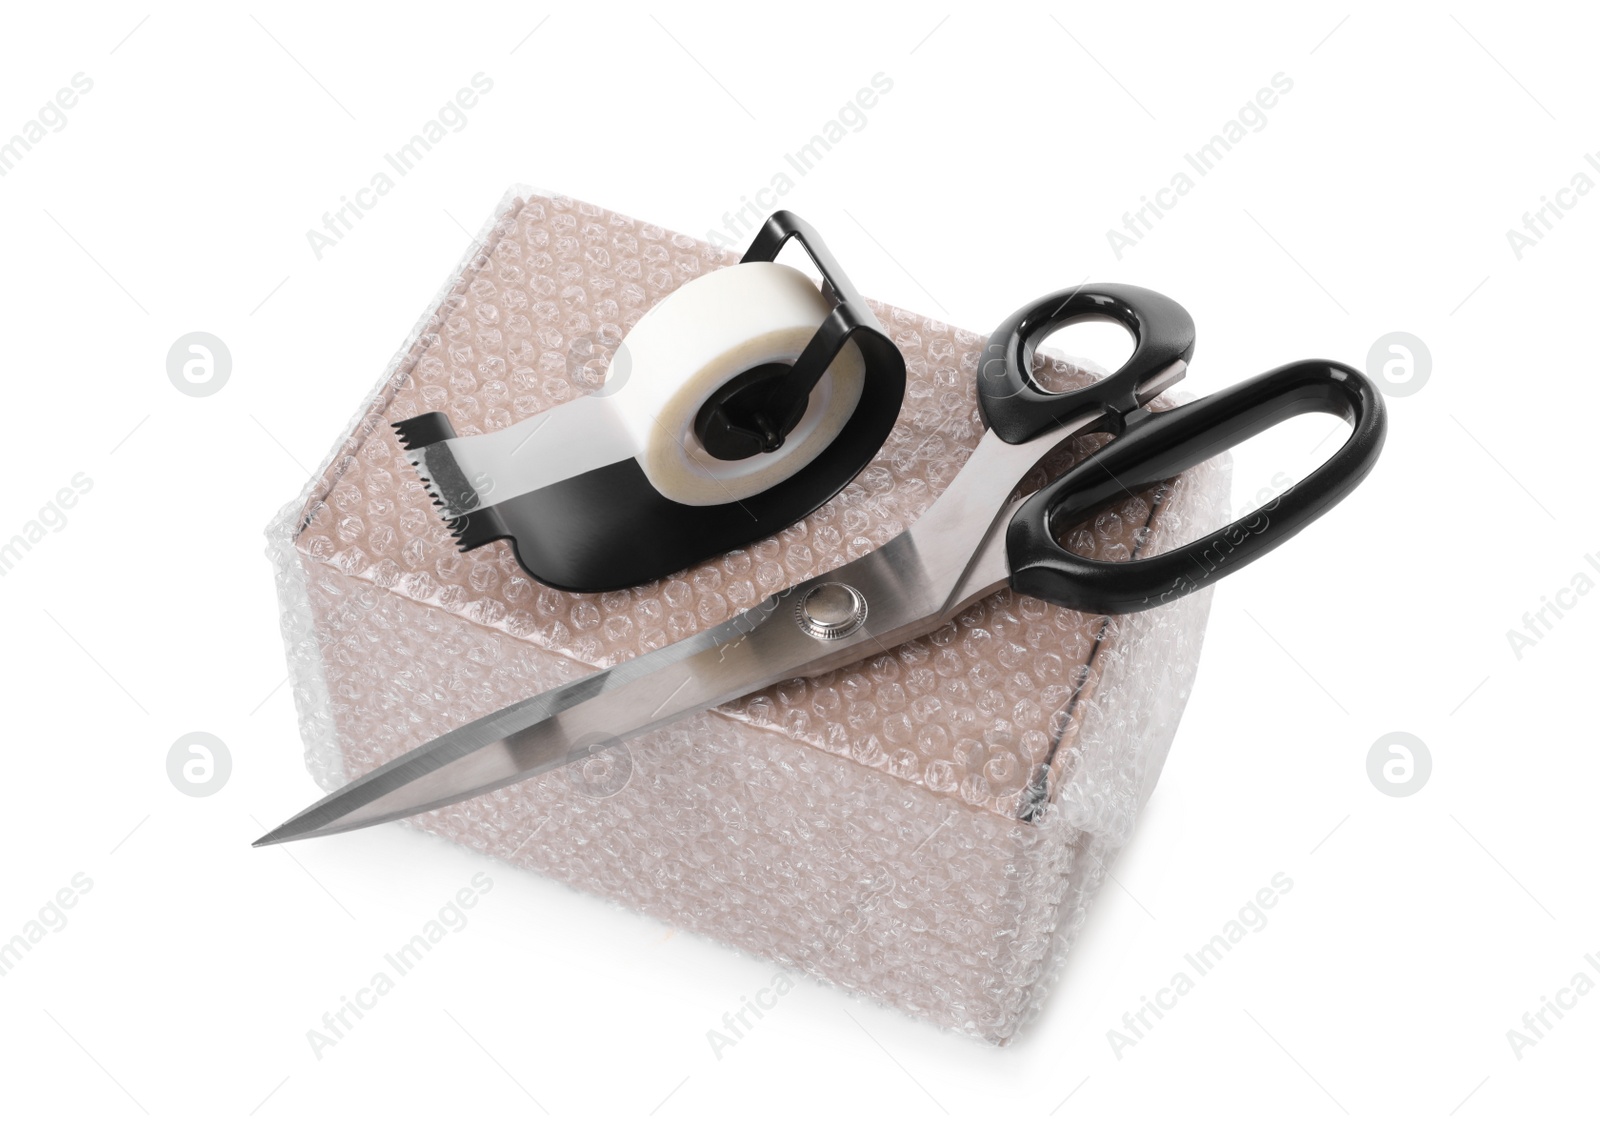 Photo of Cardboard box packed in bubble wrap, scissors and adhesive tape on white background